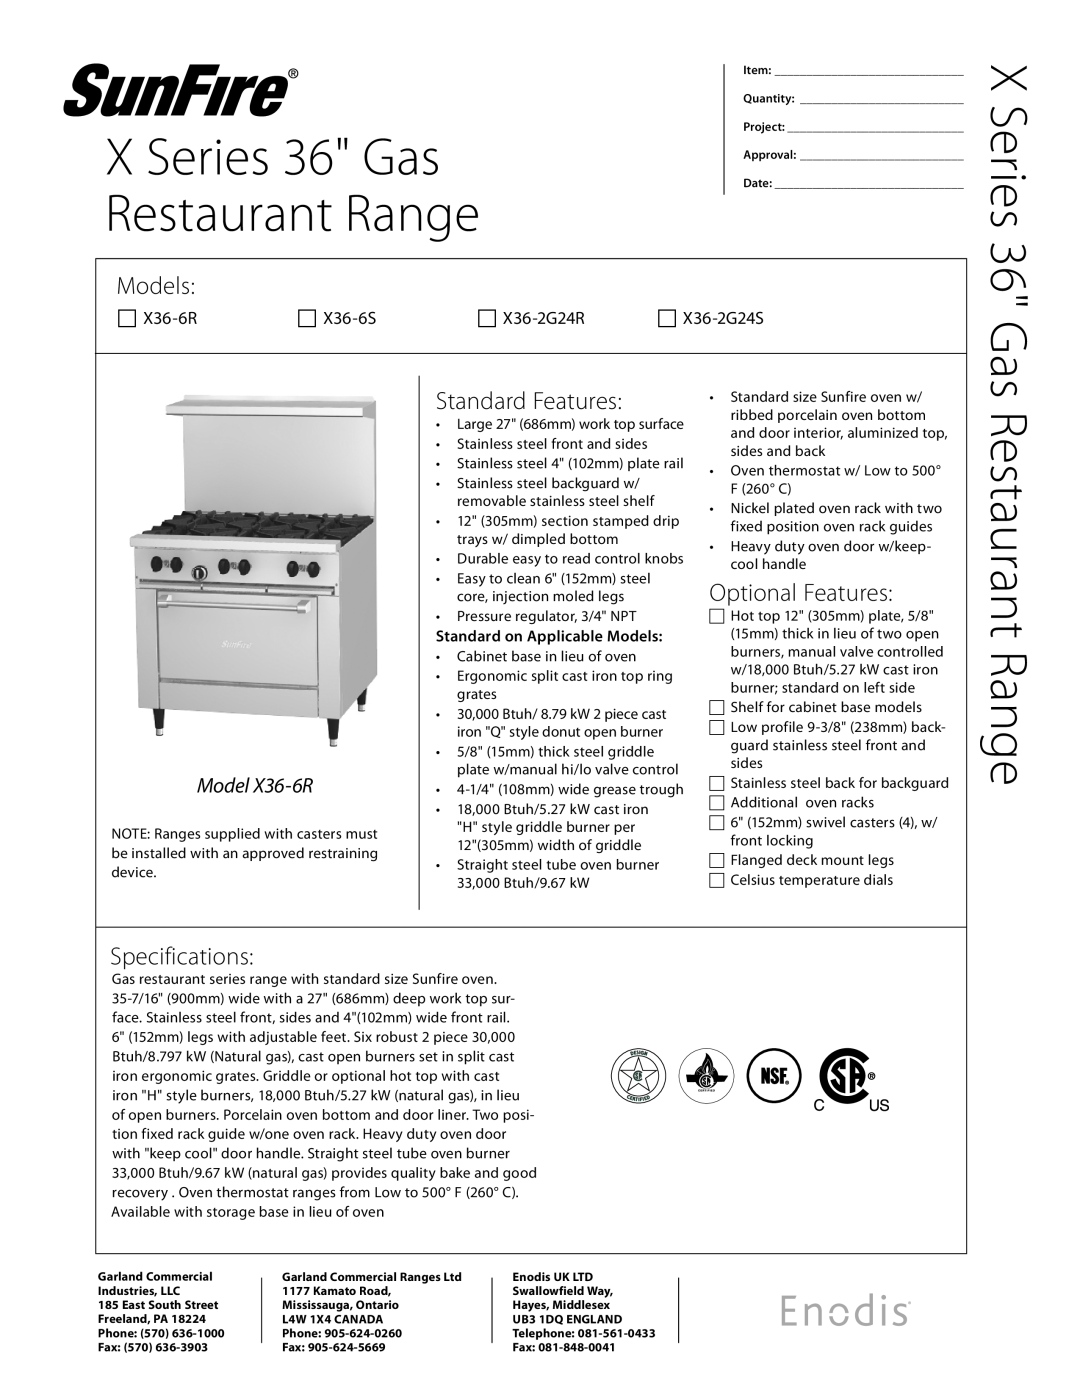 Garland specifications Restaurant Range, X Series 36 Gas, Models, Standard Features, Optional Features, Specifications 